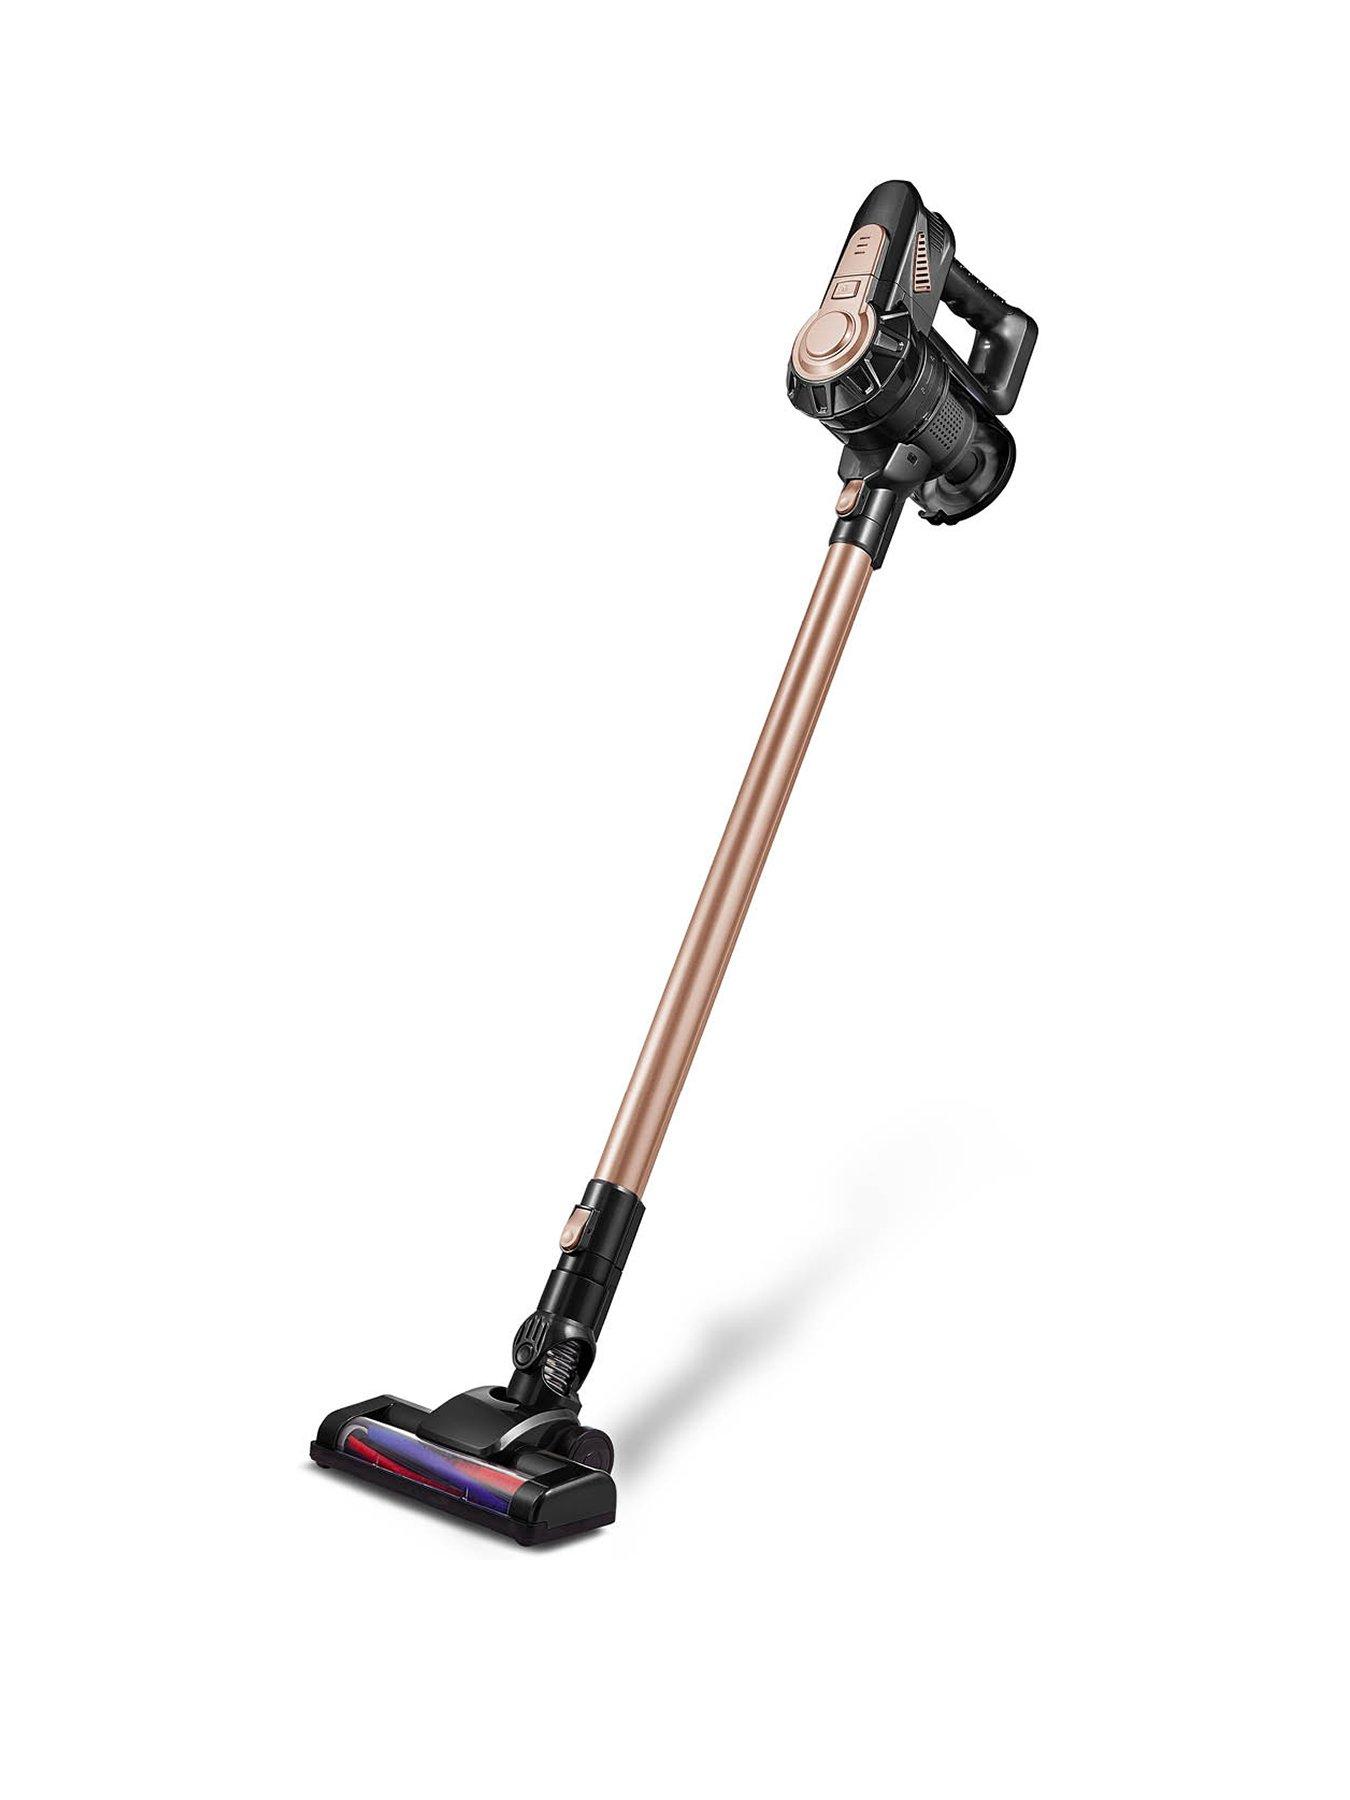 600 ml Capacity HEPA Filter Tower RVL30 Cordless Upright Vacuum Cleaner 120 W 3-in-1 45 Minute Runtime Rose Gold 22.2V Ultra Lightweight Portable